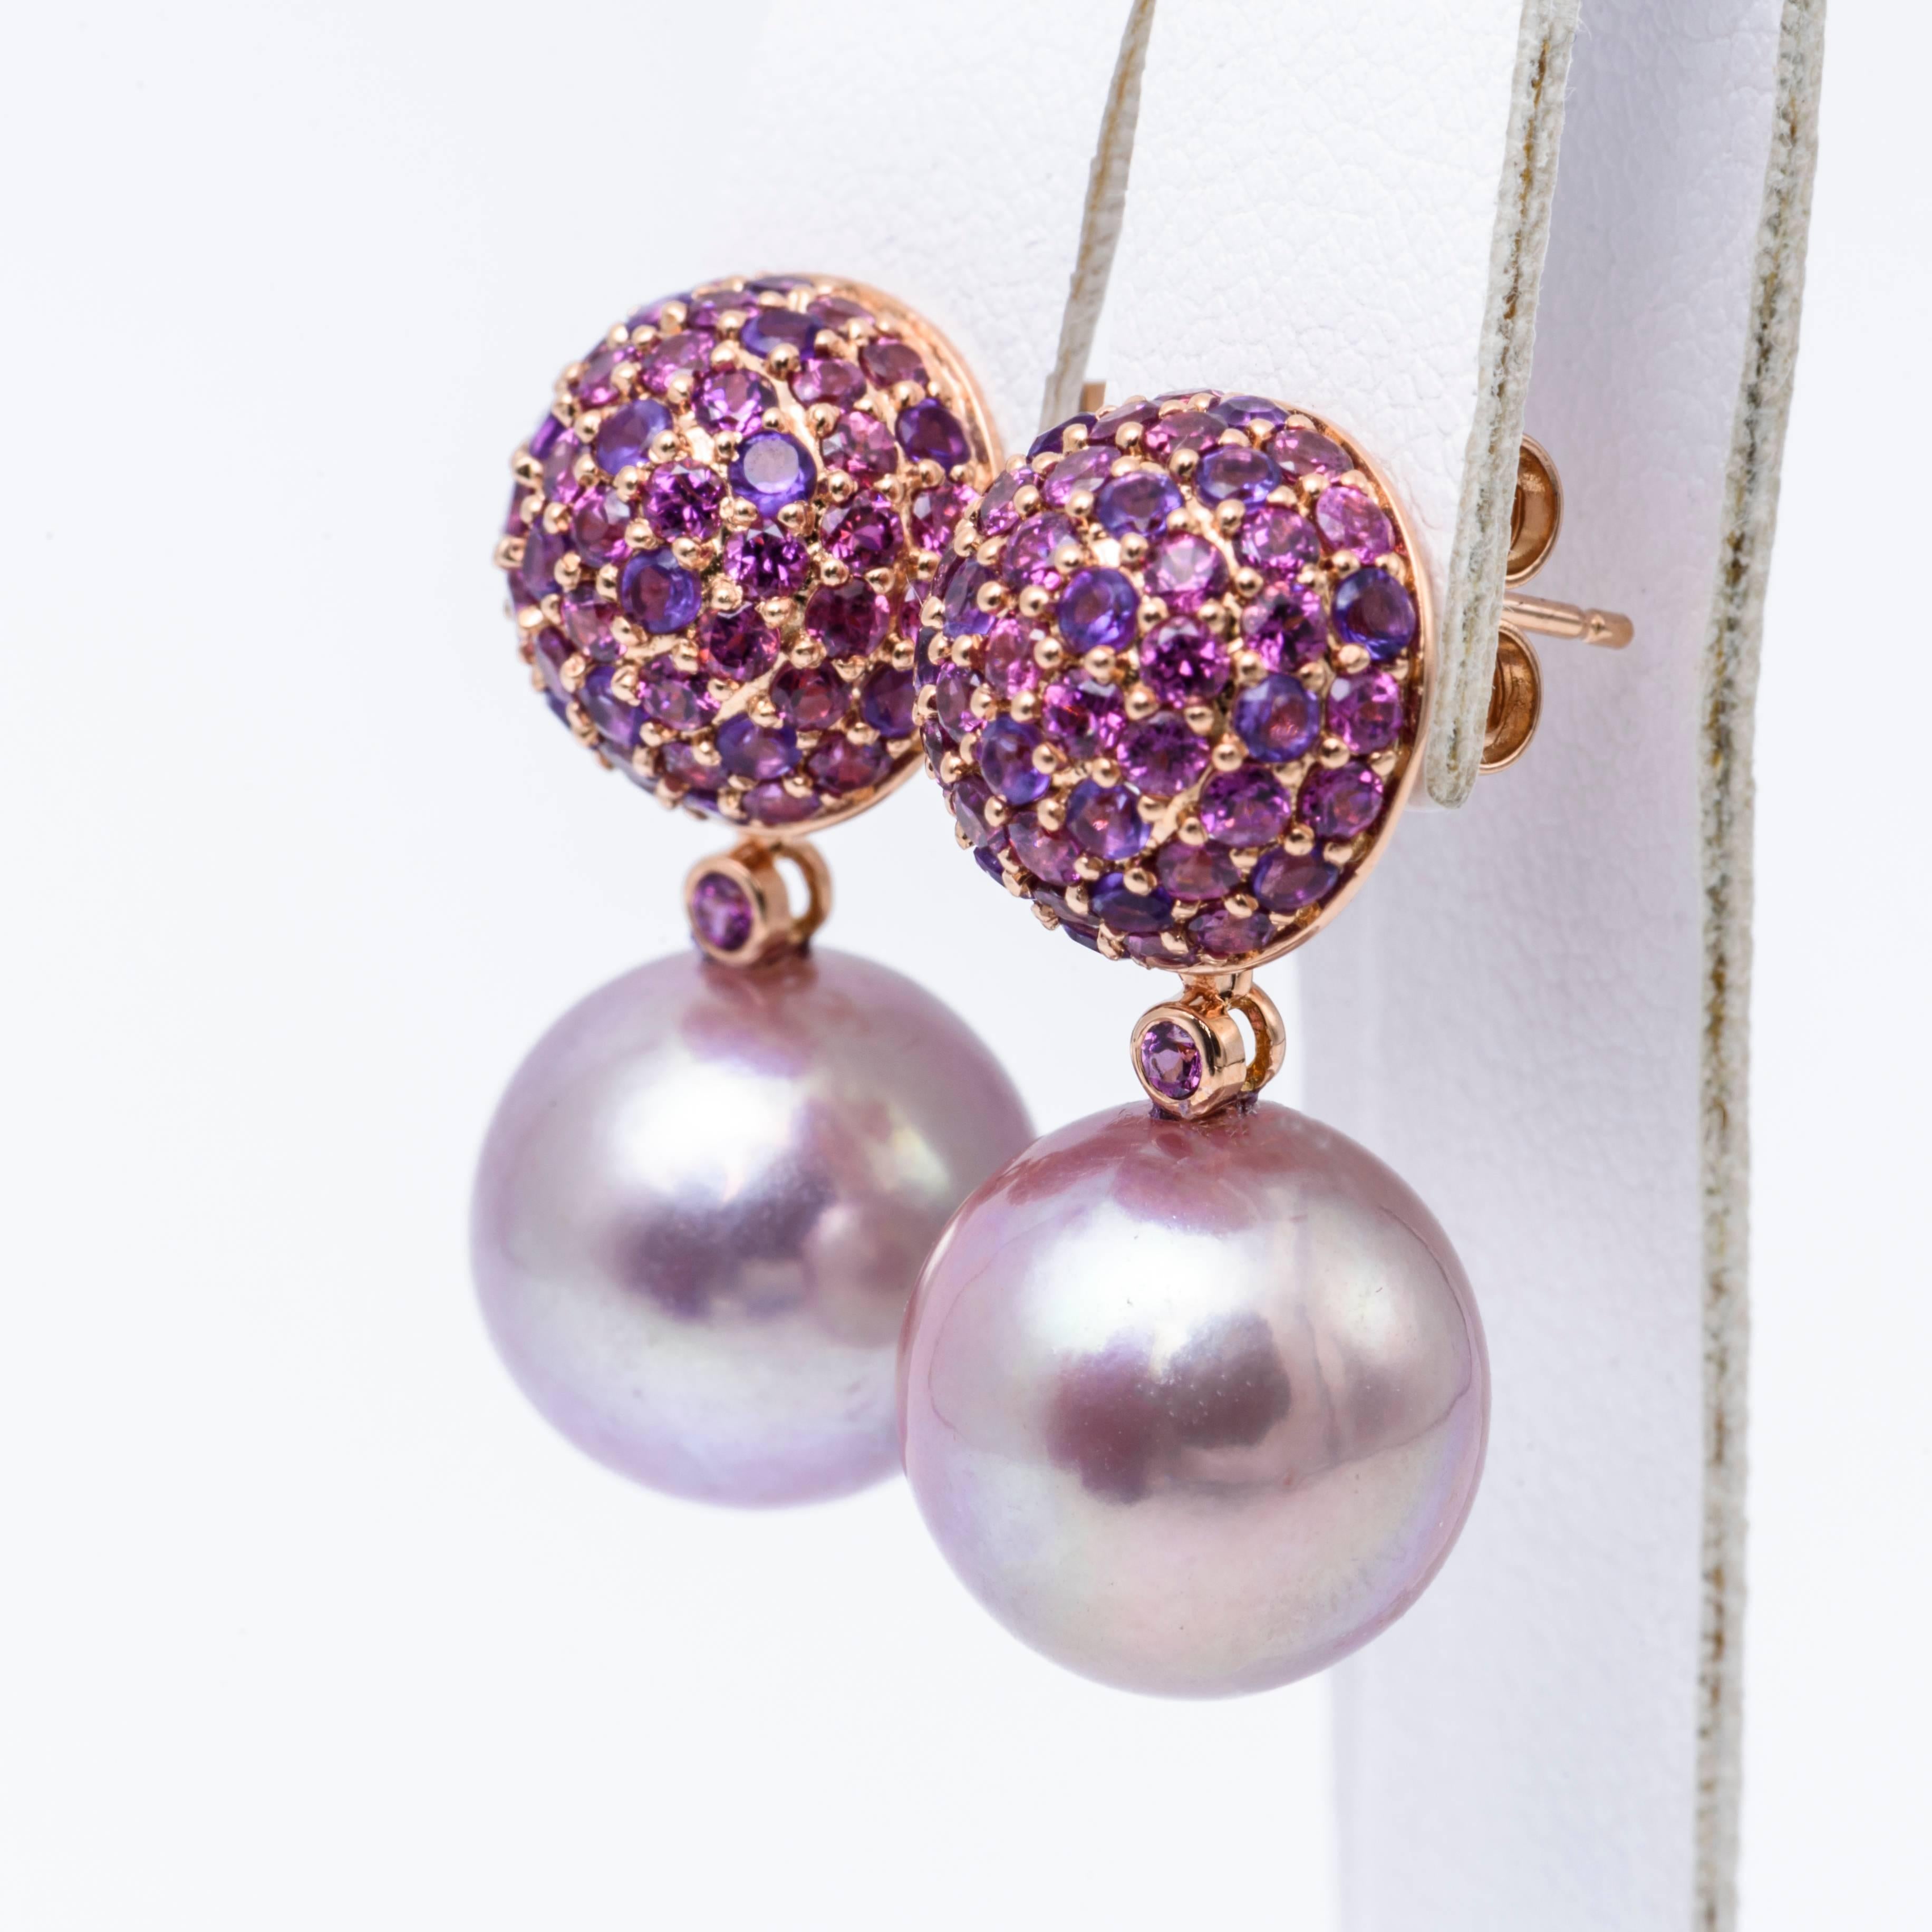 18K Rose gold drop earrings featuring two Fresh water cultured pearl measuring 12-13 mm flanked with Rhodolite, Amethyst in purple and dark pink weighing 2.80 carats.

Pearl Quality	AA
Luster	Excellent
Nacre	Very Thick